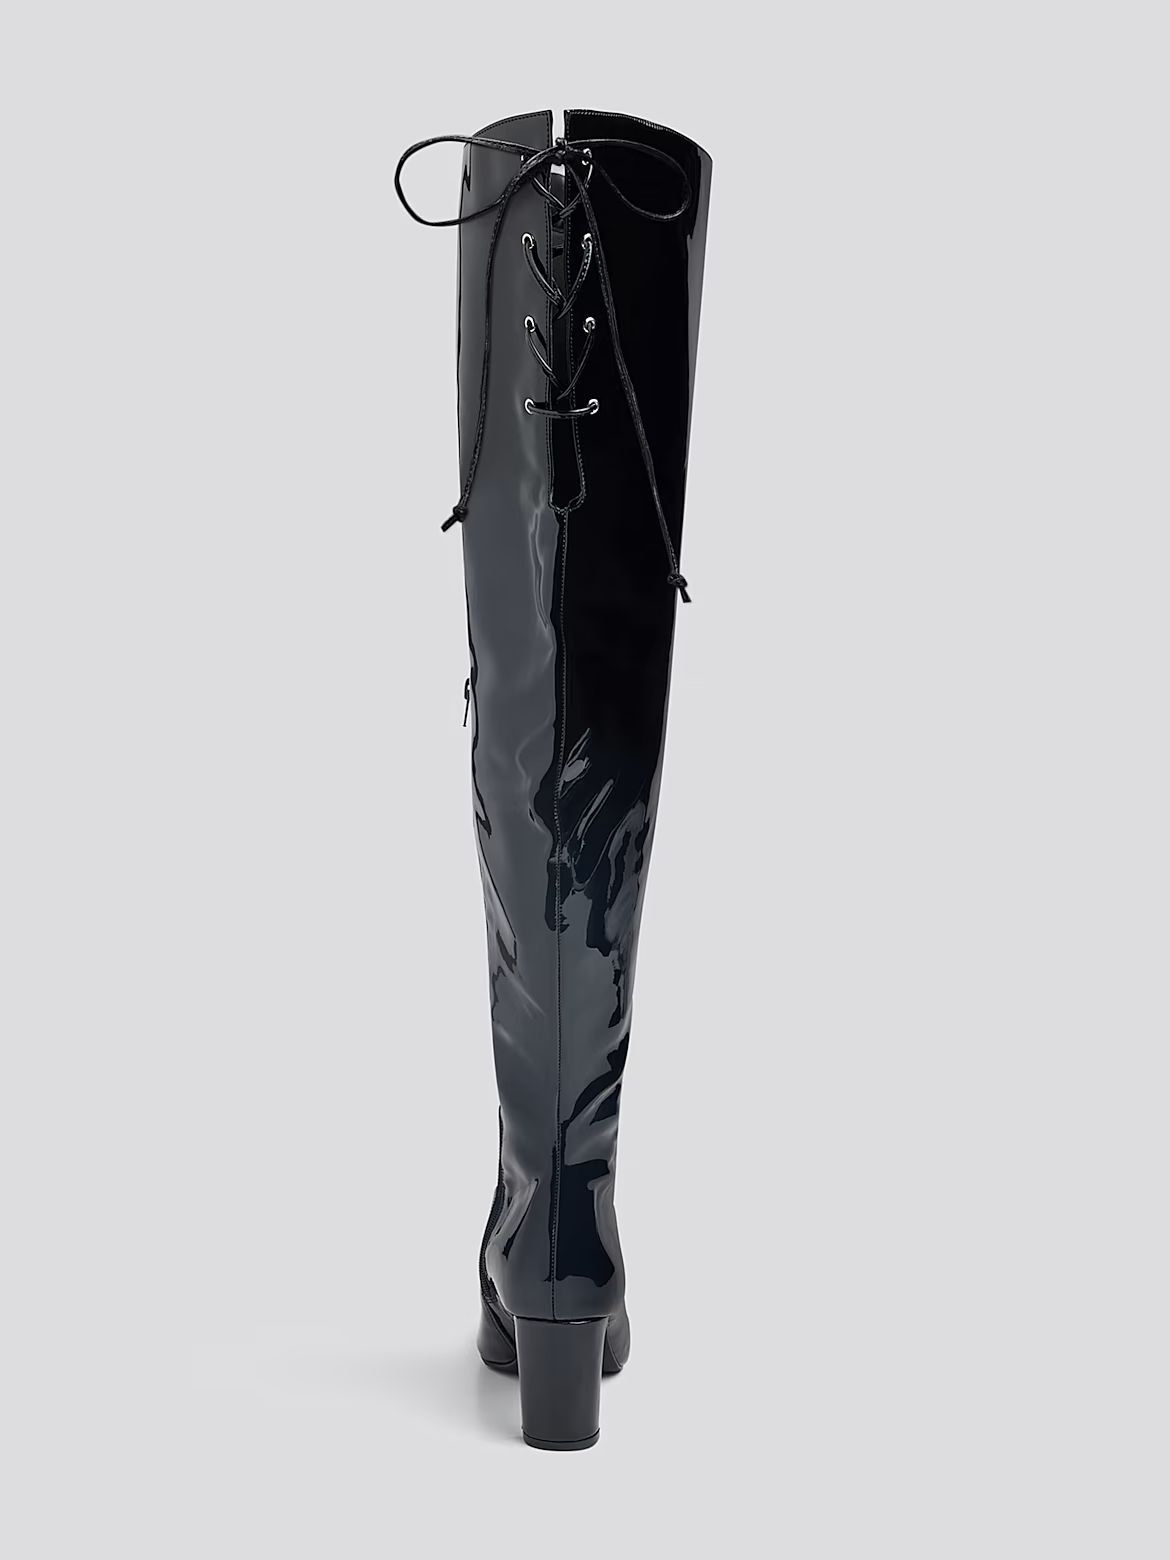 Alfinil Patent Leather Thigh-High Boots - Nadia x FTF - Fashion To Figure | Fashion To Figure